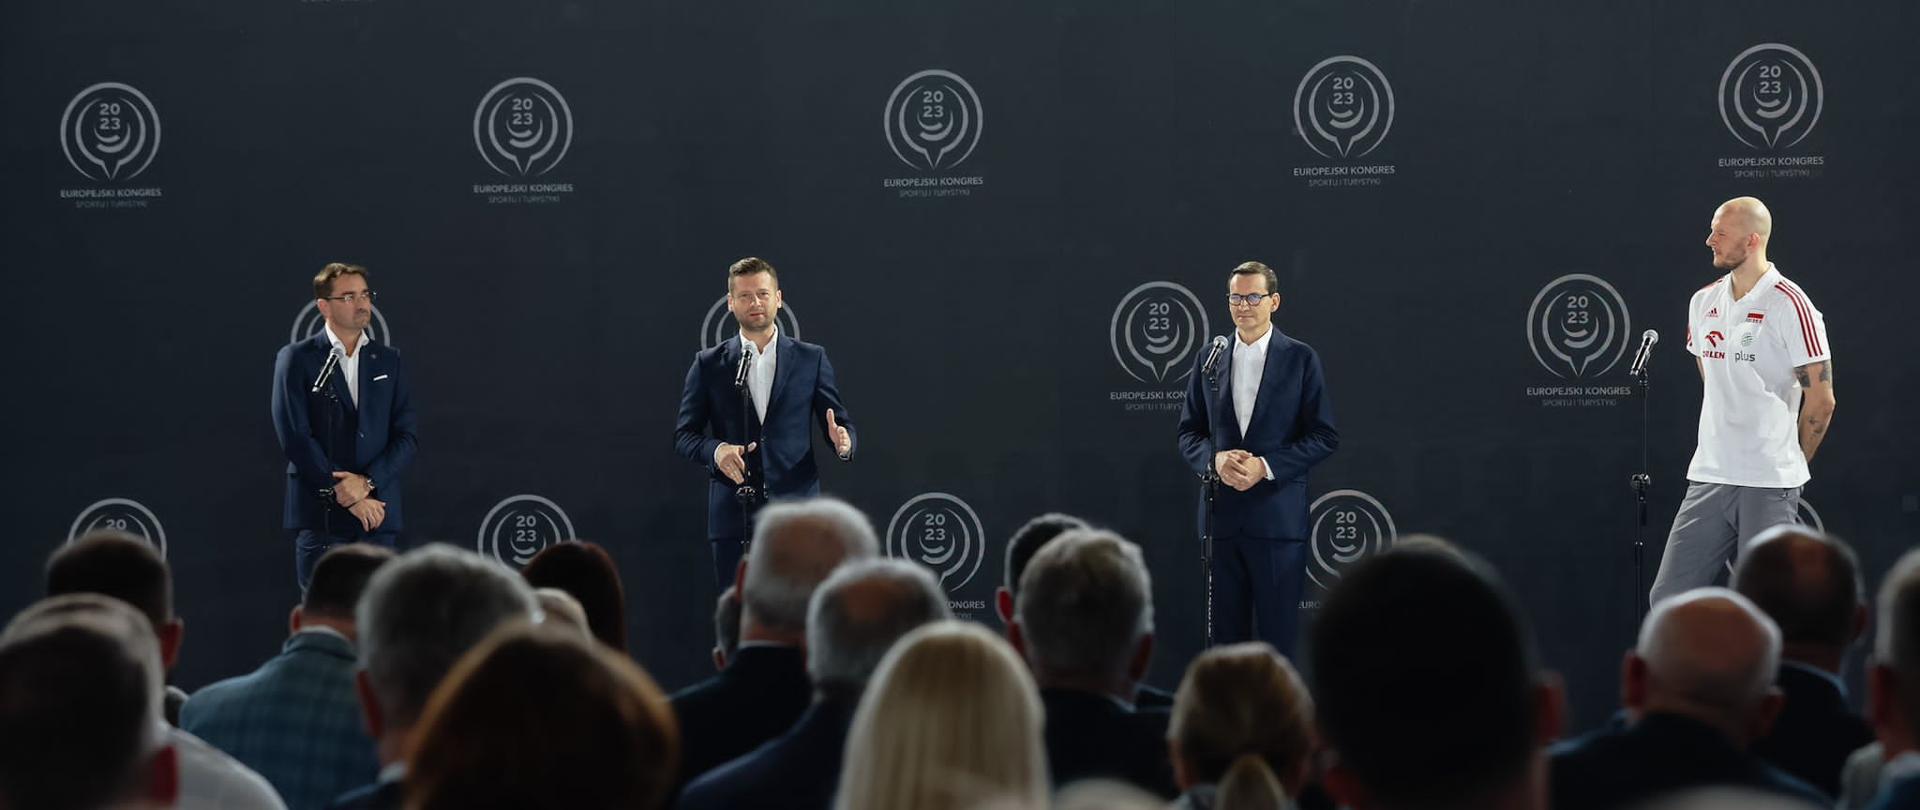 Four men standing on stage, the audience is listening. Prime Minister Mateusz Morawiecki together with Minister of Sport and Tourism Kamil Bortniczuk, President of the Polish Volleyball Federation Sebastian Świderski and captain of the Polish national volleyball team Bartosz Kurek announce that Poland will host the 2027 Volleyball World Championships